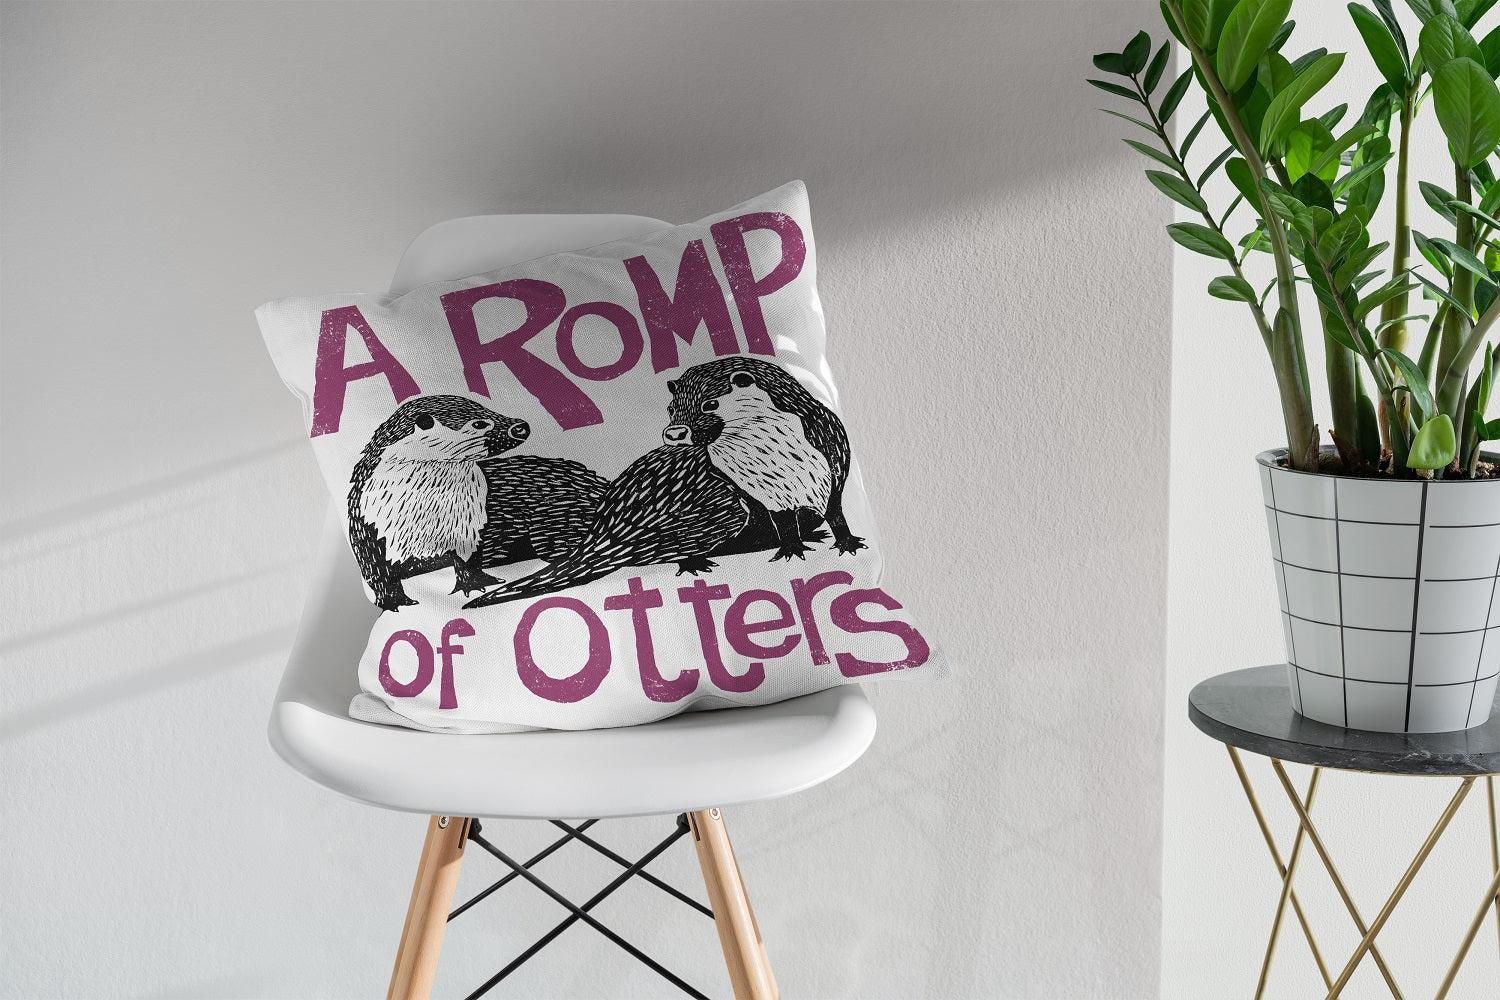 Romp of Otters - Collective Noun Cushion